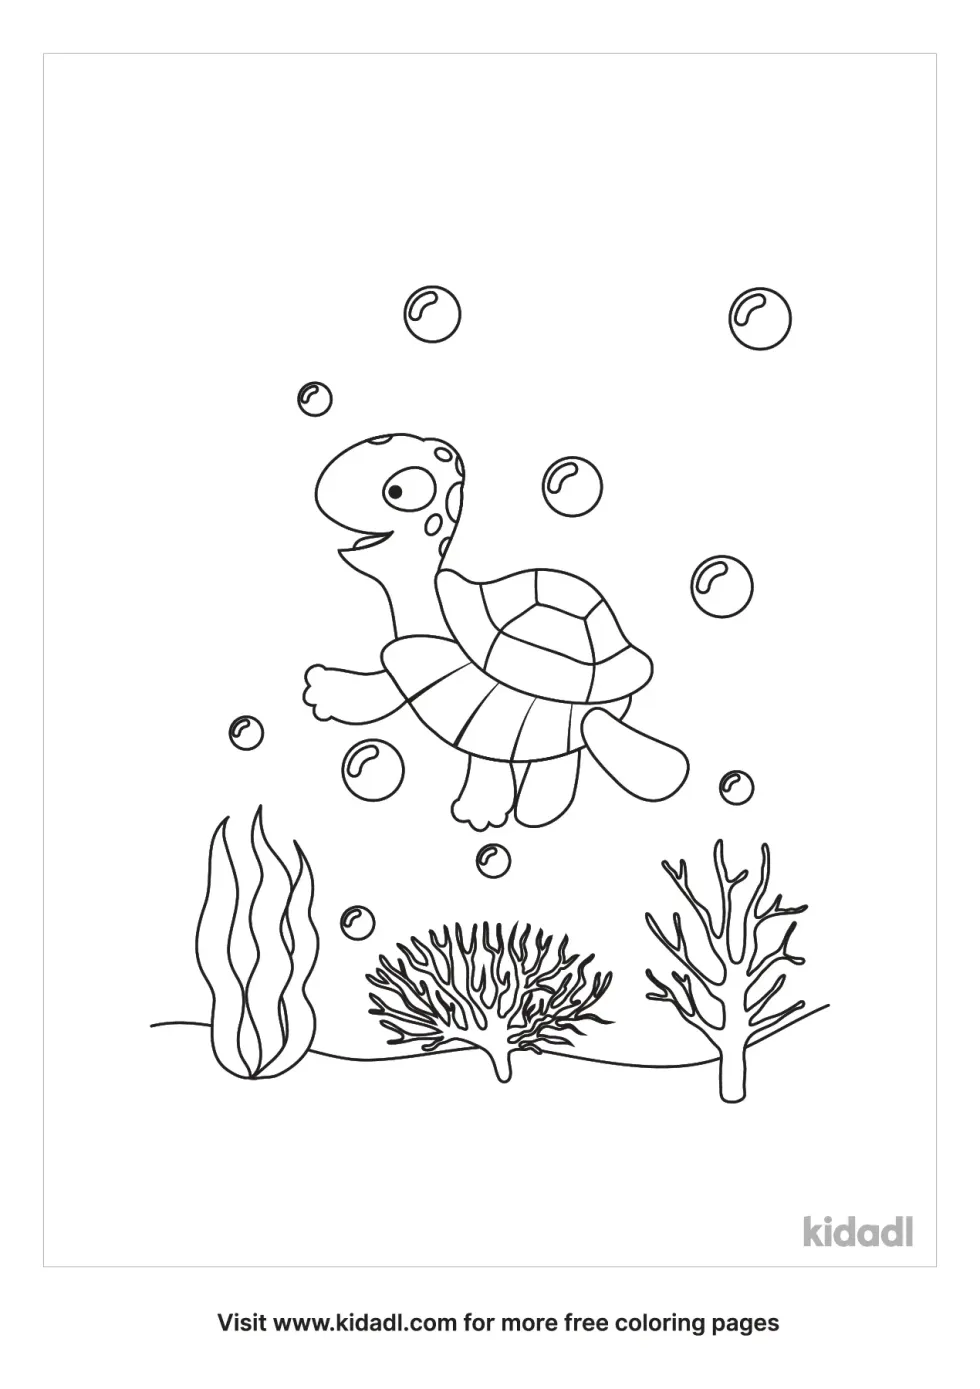 Turtle In Log Stream Coloring Page